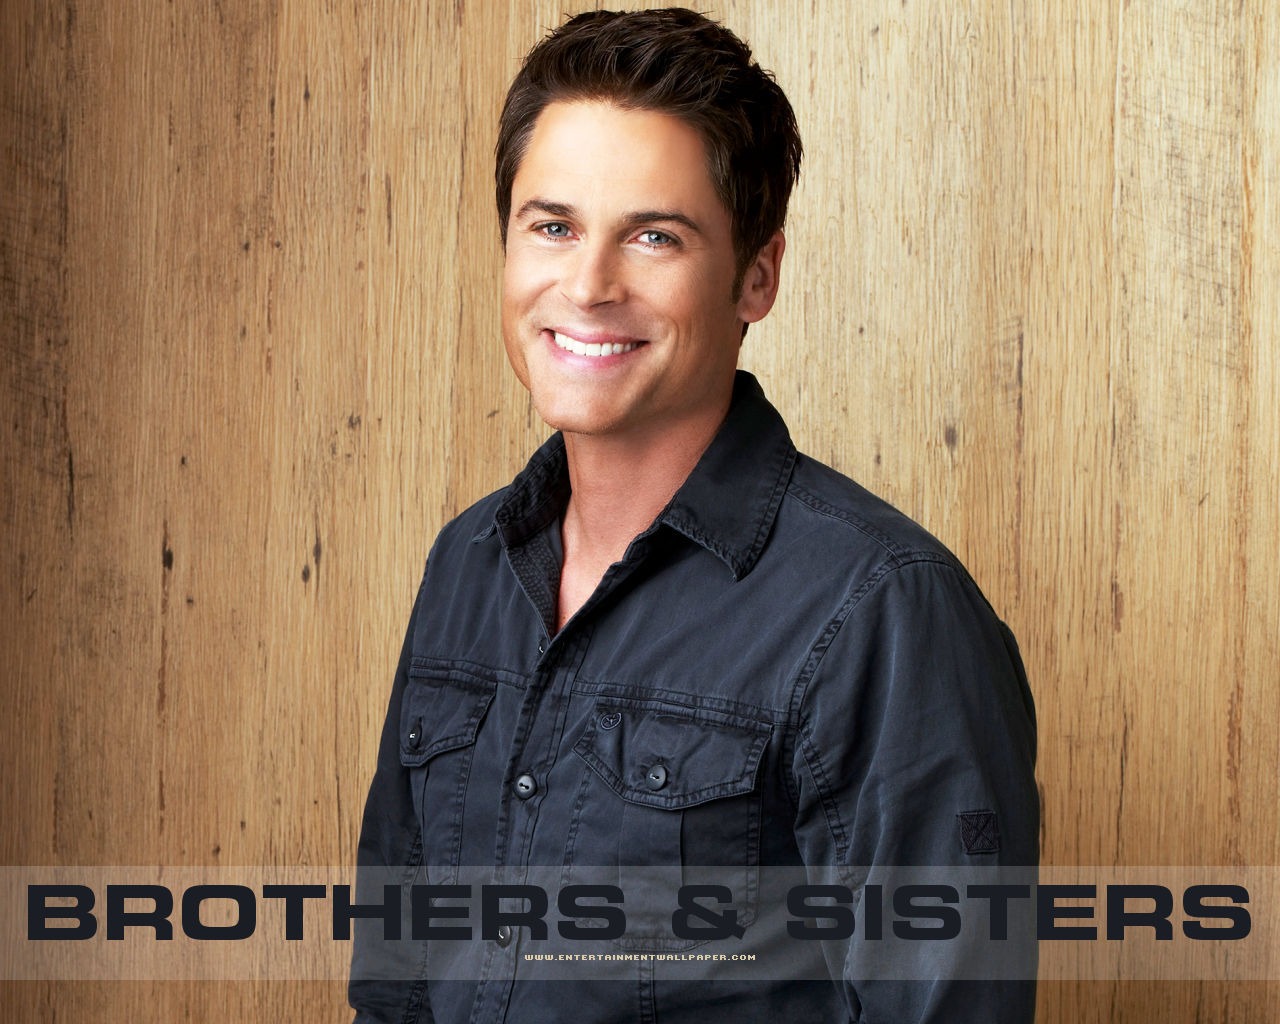 Brothers & Sisters 兄弟姐妹18 - 1280x1024